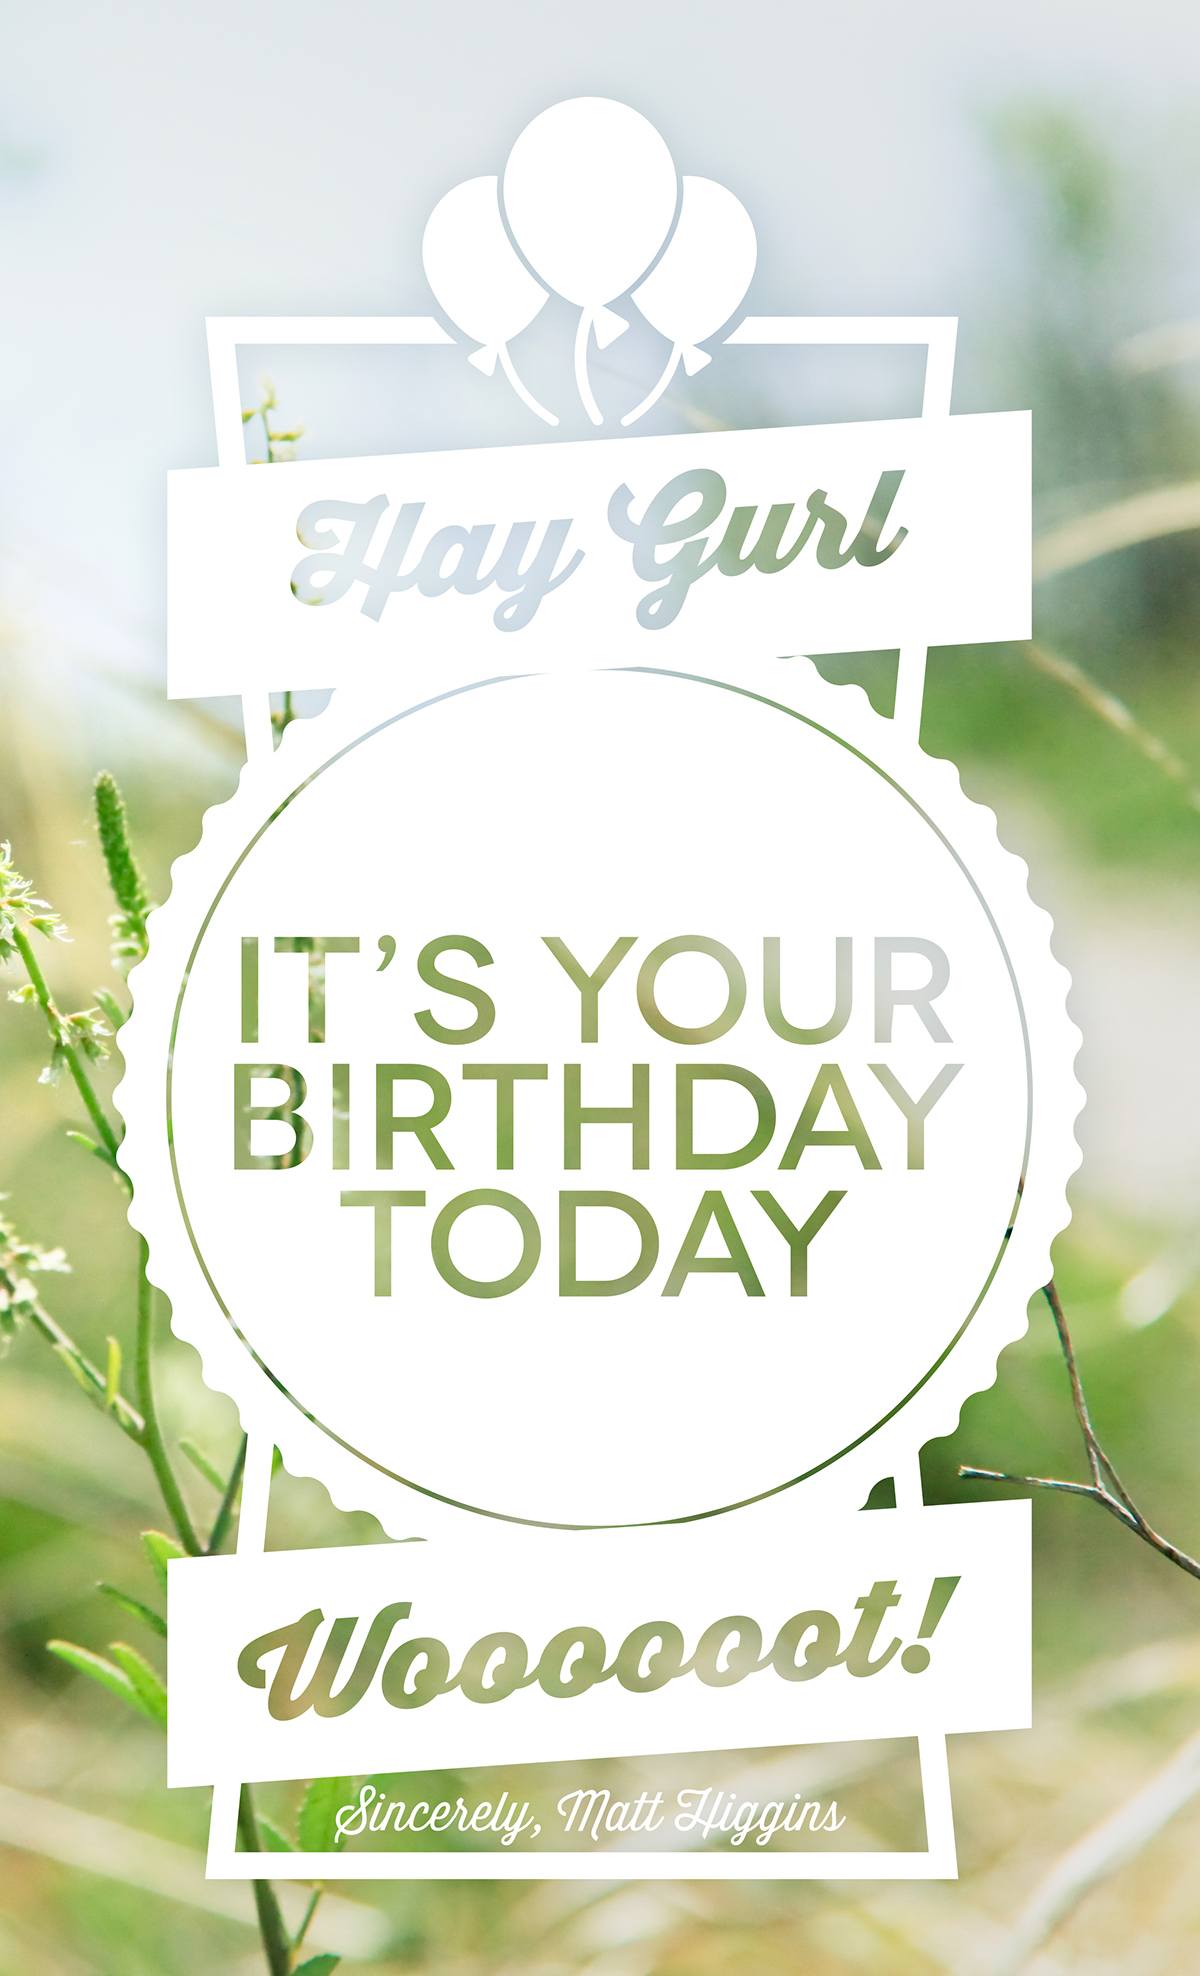 happy birthday cards Birthday greeting greetings posters type photos poster wish happy clean SCAD